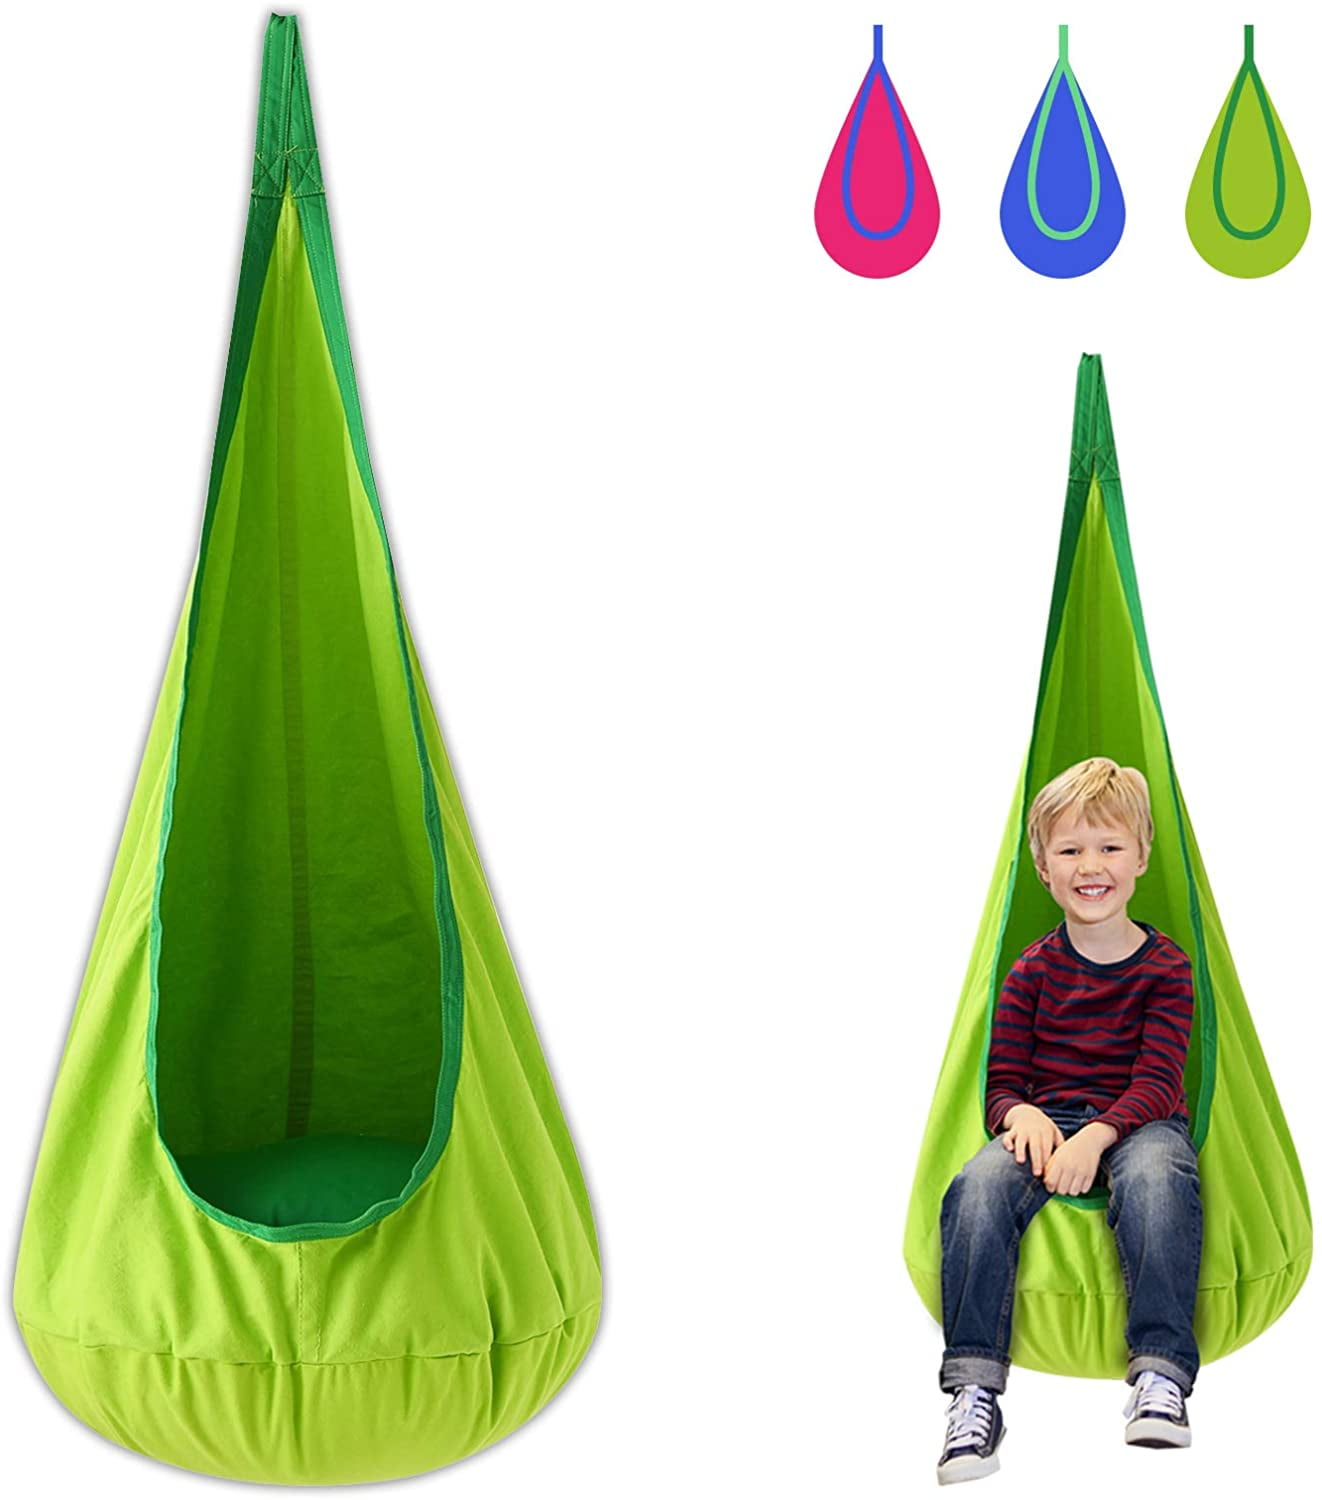 Kids Hammock Hanging Pod Chair Foldable Cotton Child Swing Seat Indoor Outdoor